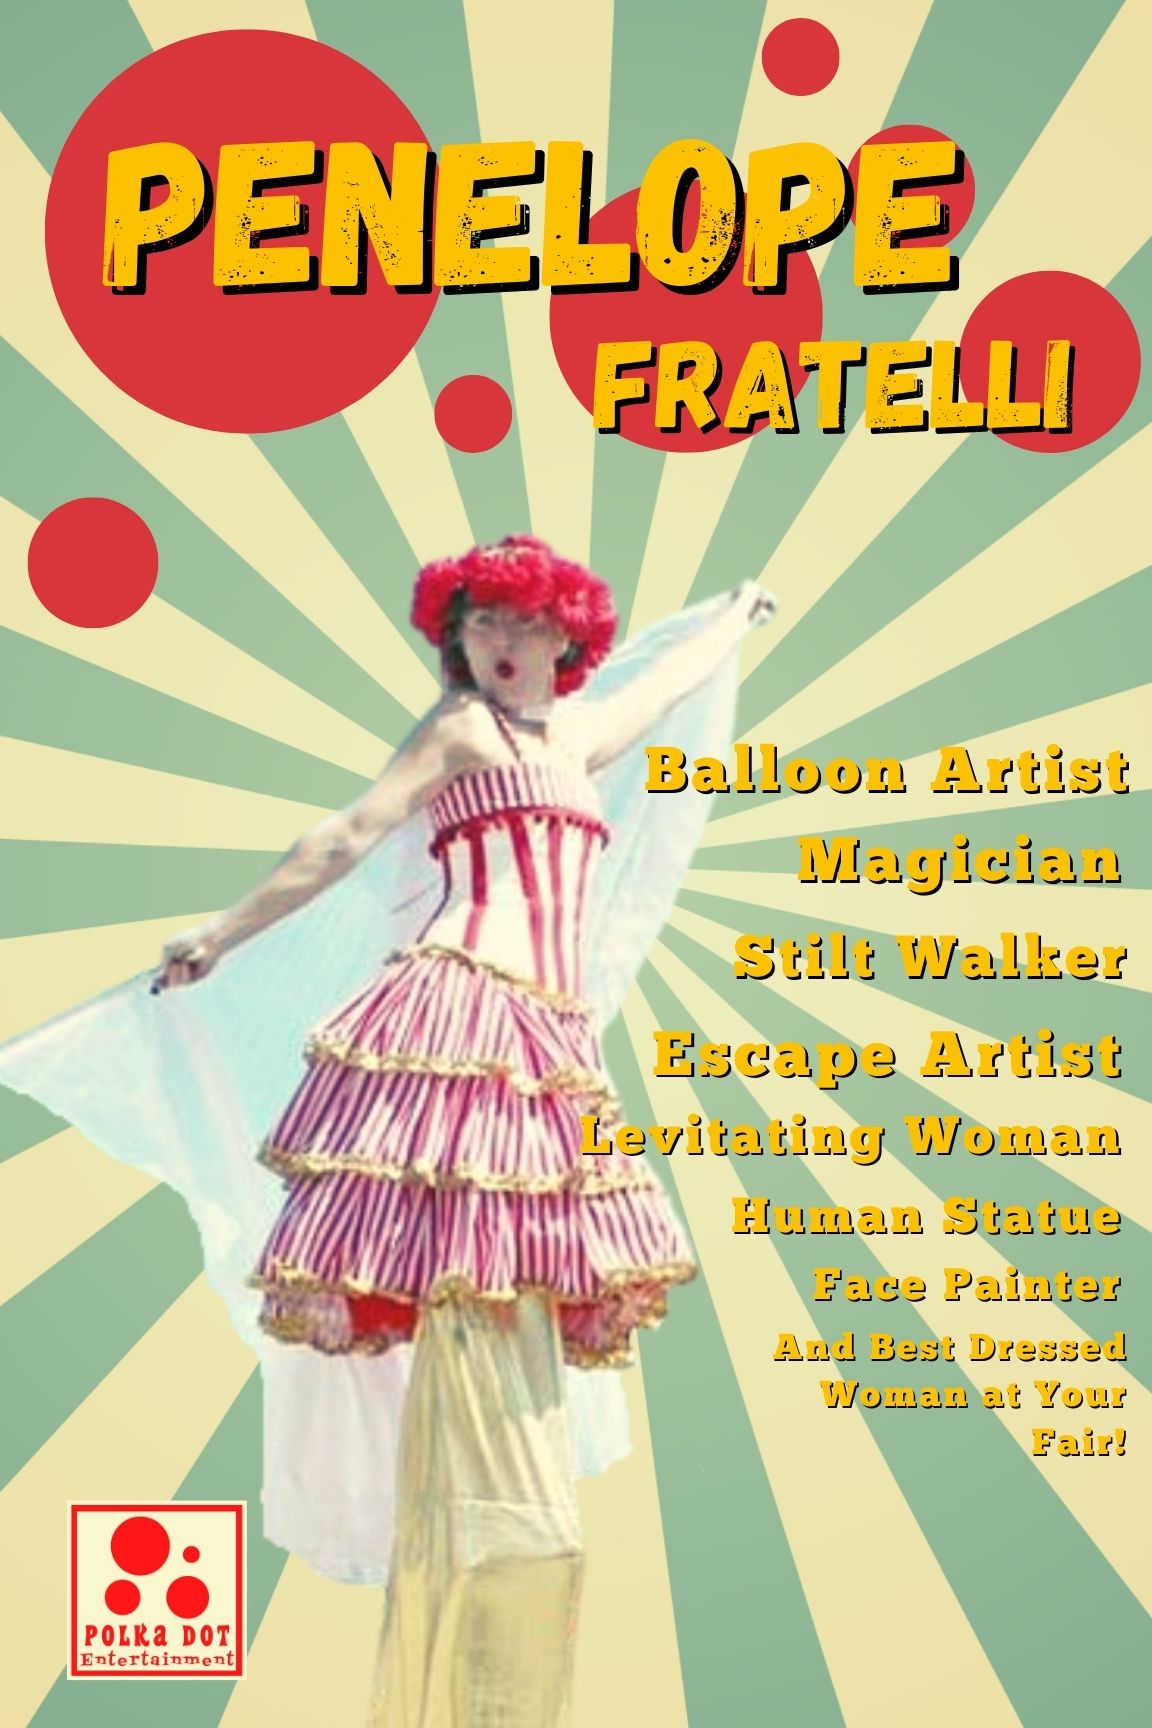 Penelope Fratelli Polka Dot Entertainment Strolling acts